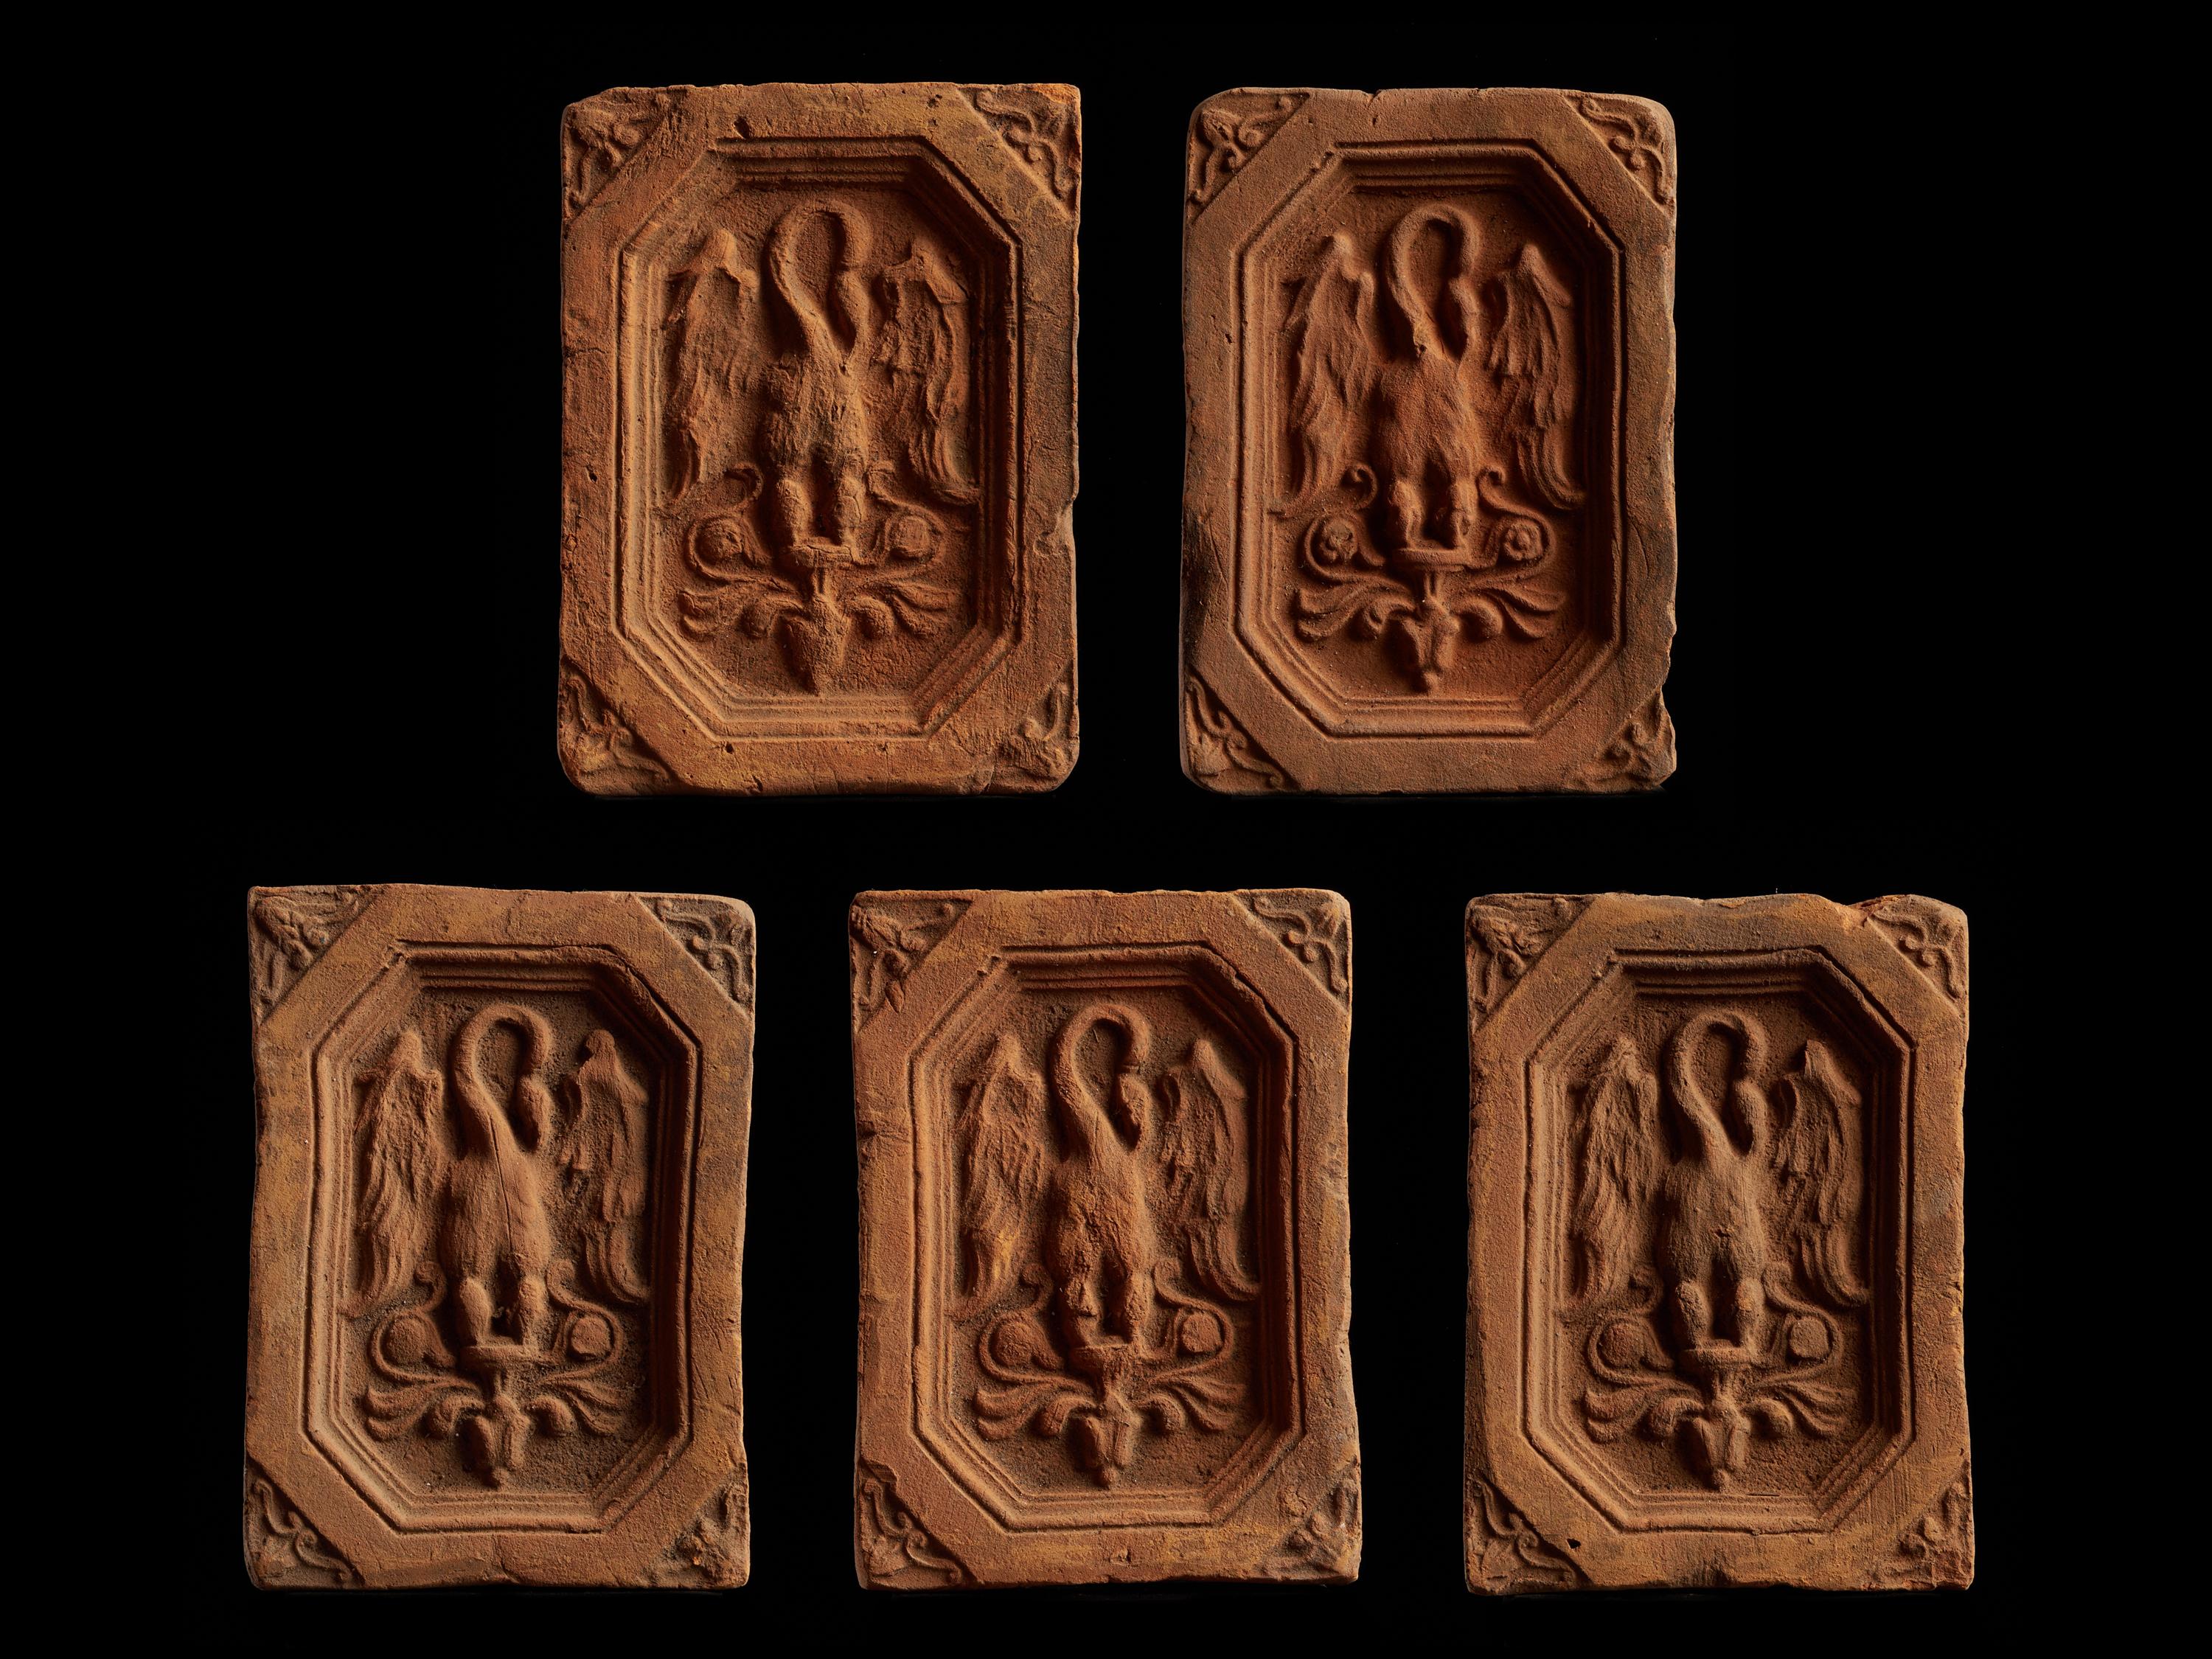 Made of earthenware, this set of tiles (5) depicts a beautiful but mysterious winged creature. Chimera, like and placed on a pedestal, this creature shows delicate features and has quite an unusual shape. A remarkable work of art, and poetry.